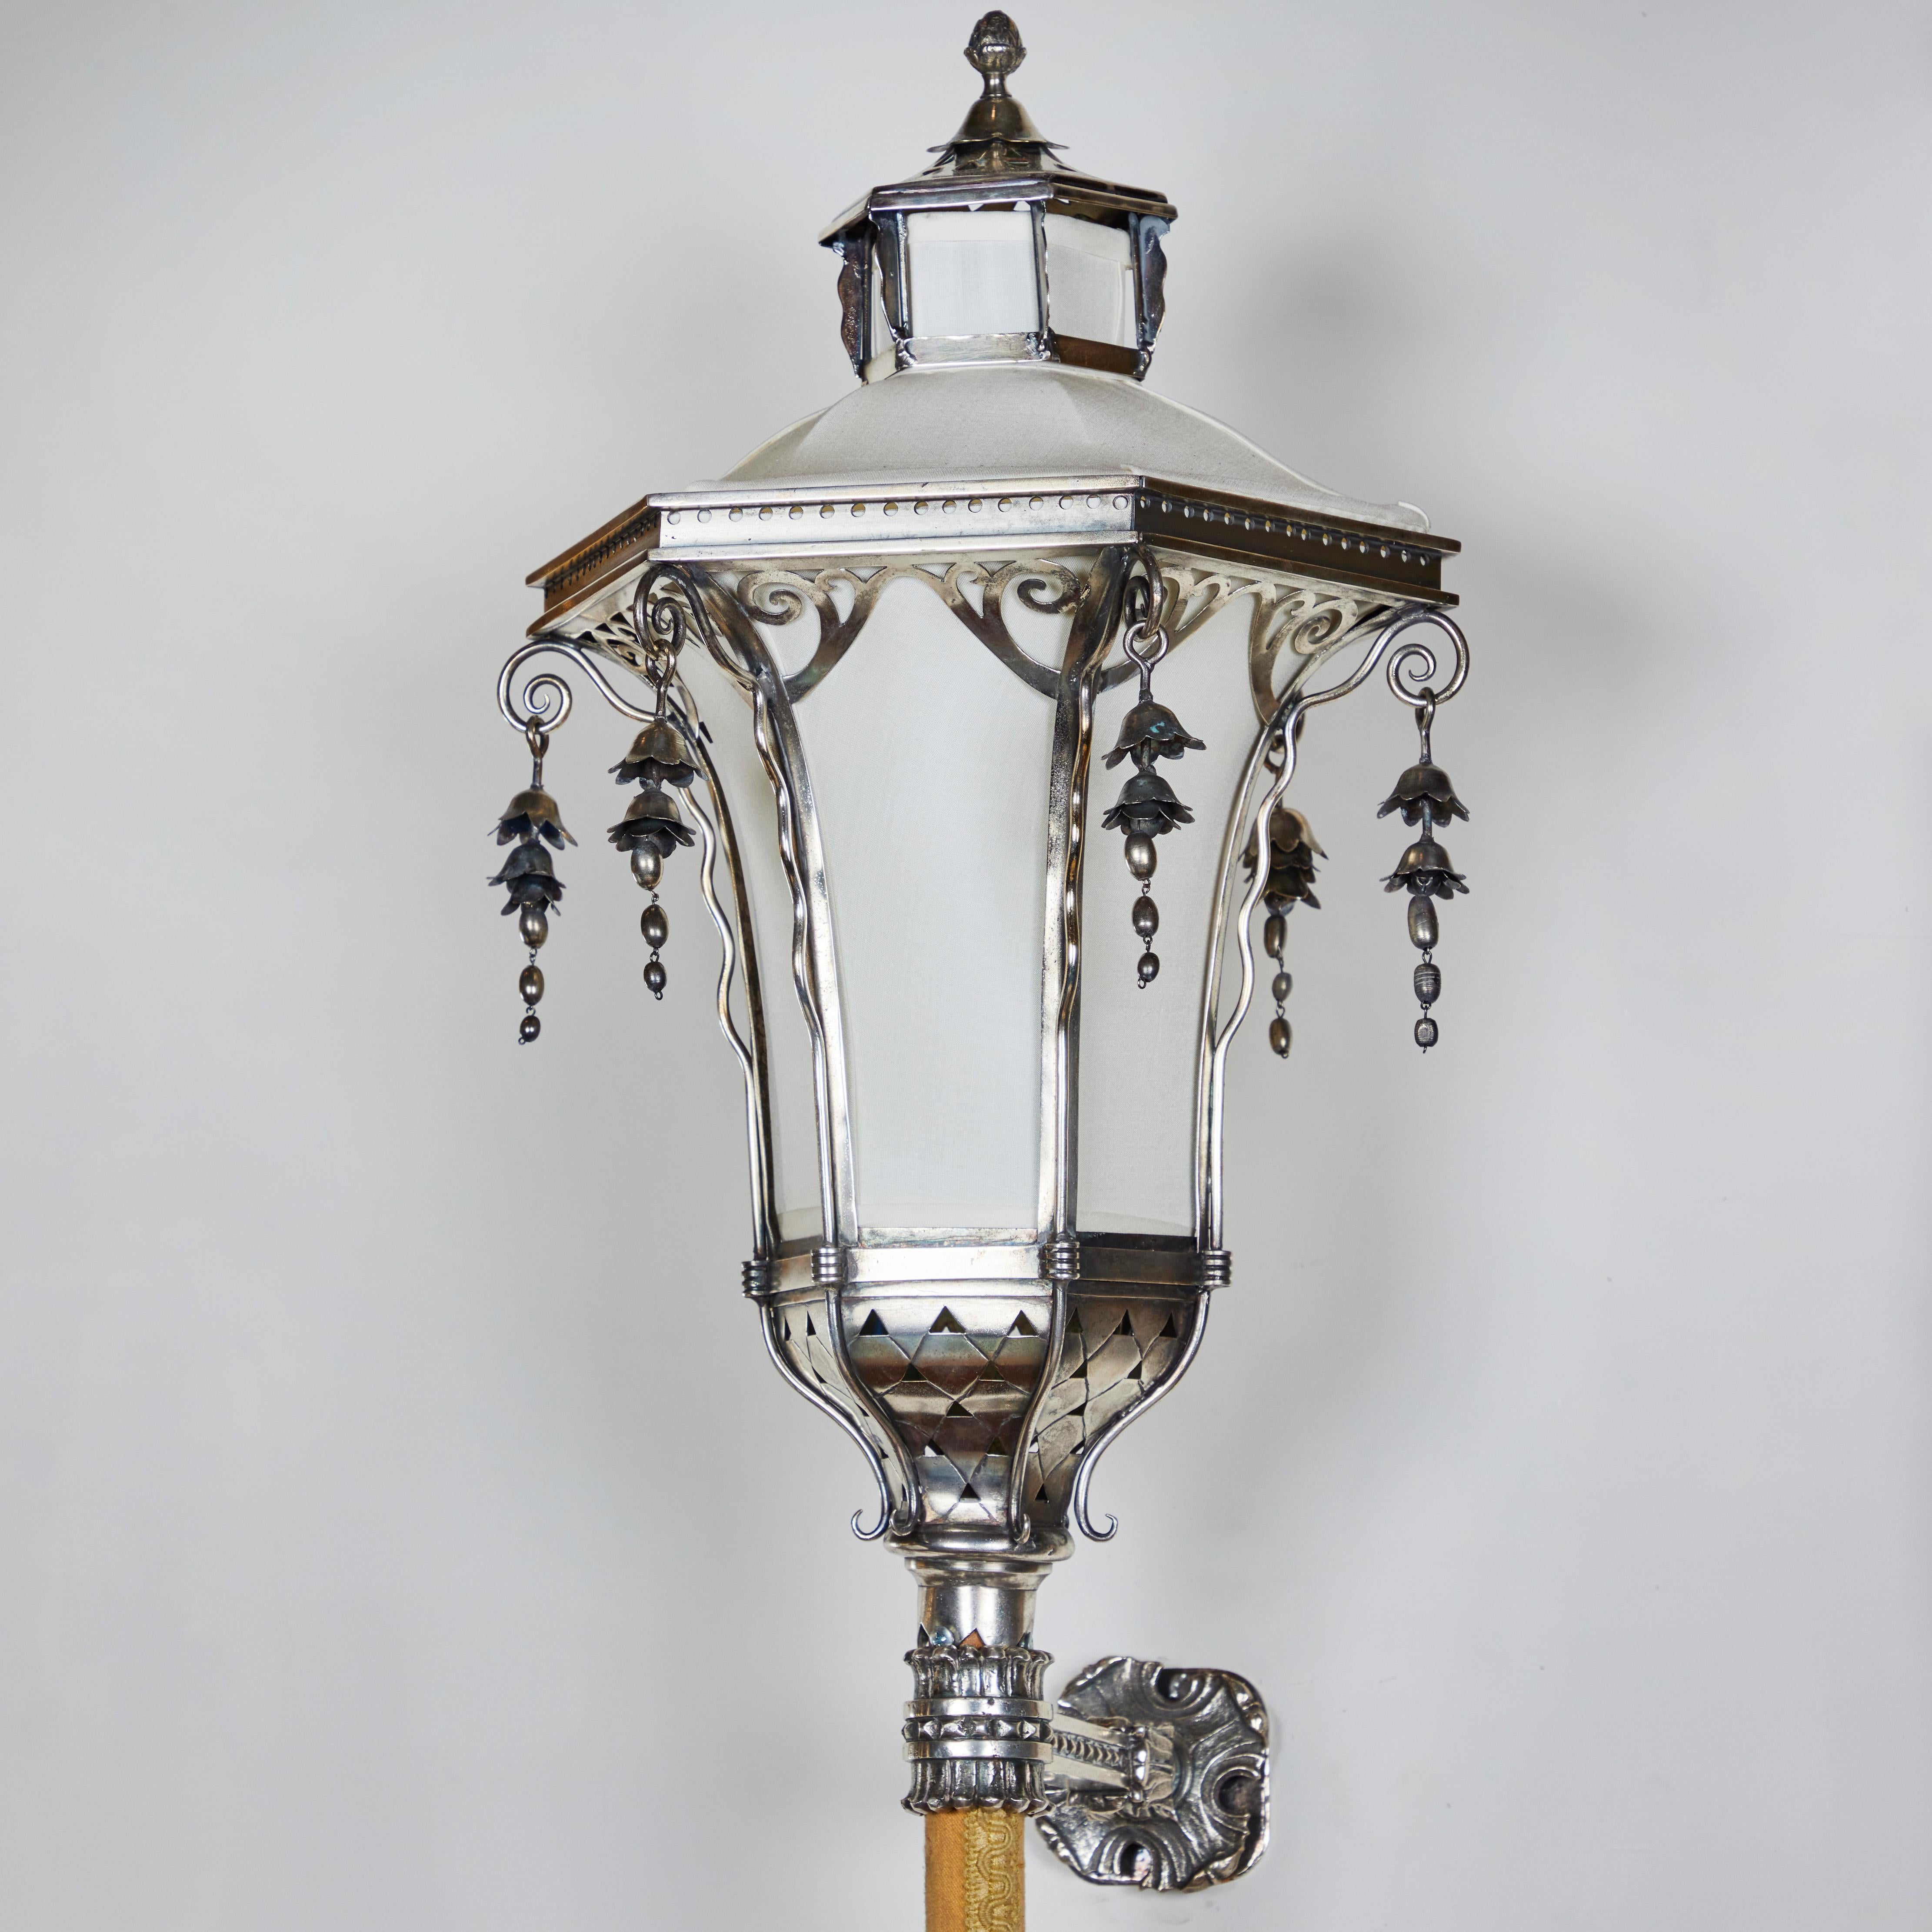 Sterling silver pagoda shaped wall sconce with bracket and new linen shade.  Pole covered in brocade fabric.  Metal cap at end of pole.  Top portion of shade lifts off to change light bulb. European wiring.  Liberty Period (1880-1920).